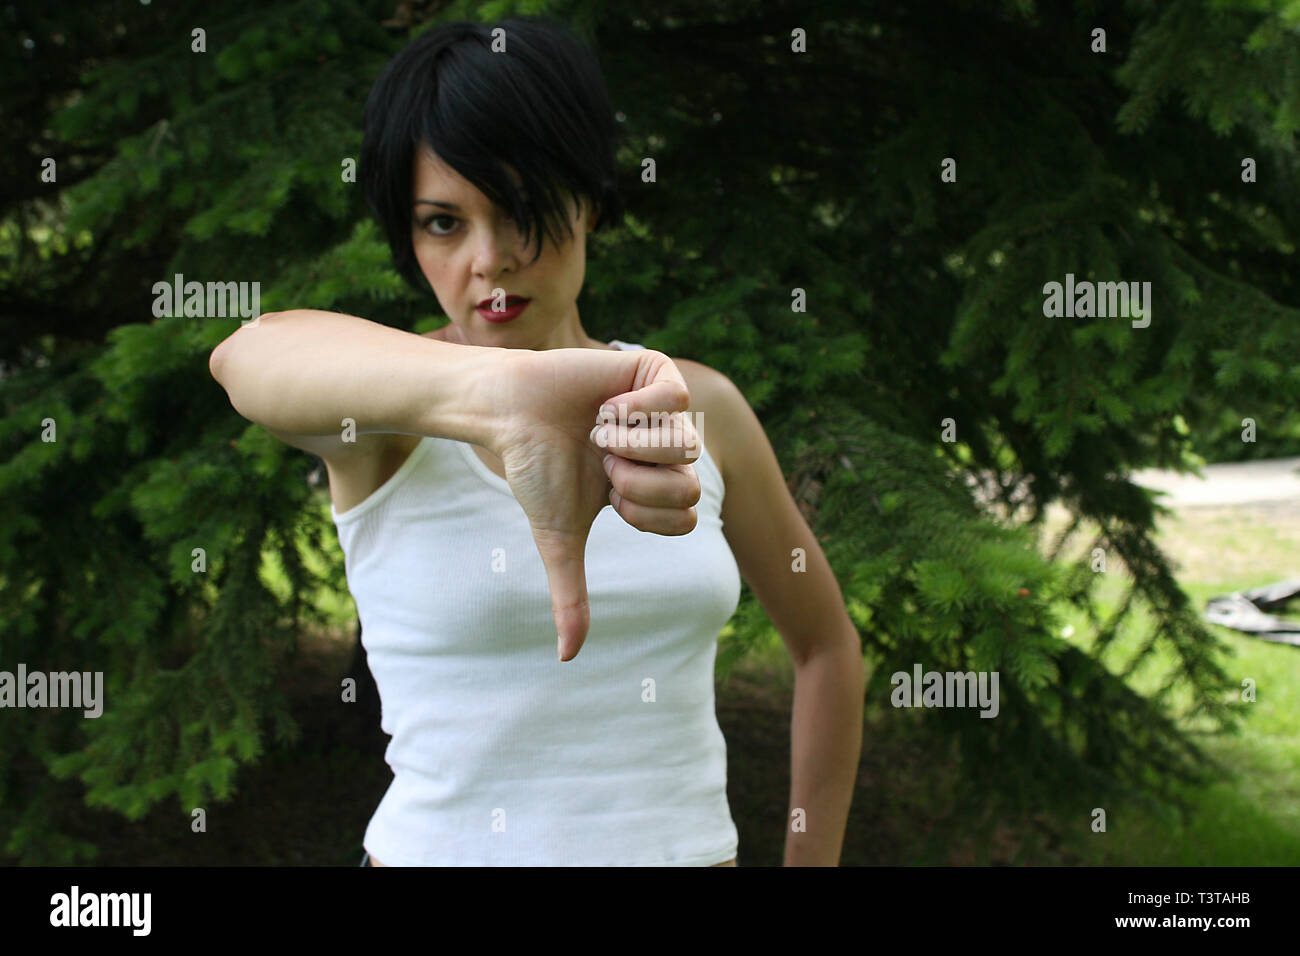 Beautiful dark haired lady with a white top making hand signals. Two thumbs down. Stock Photo